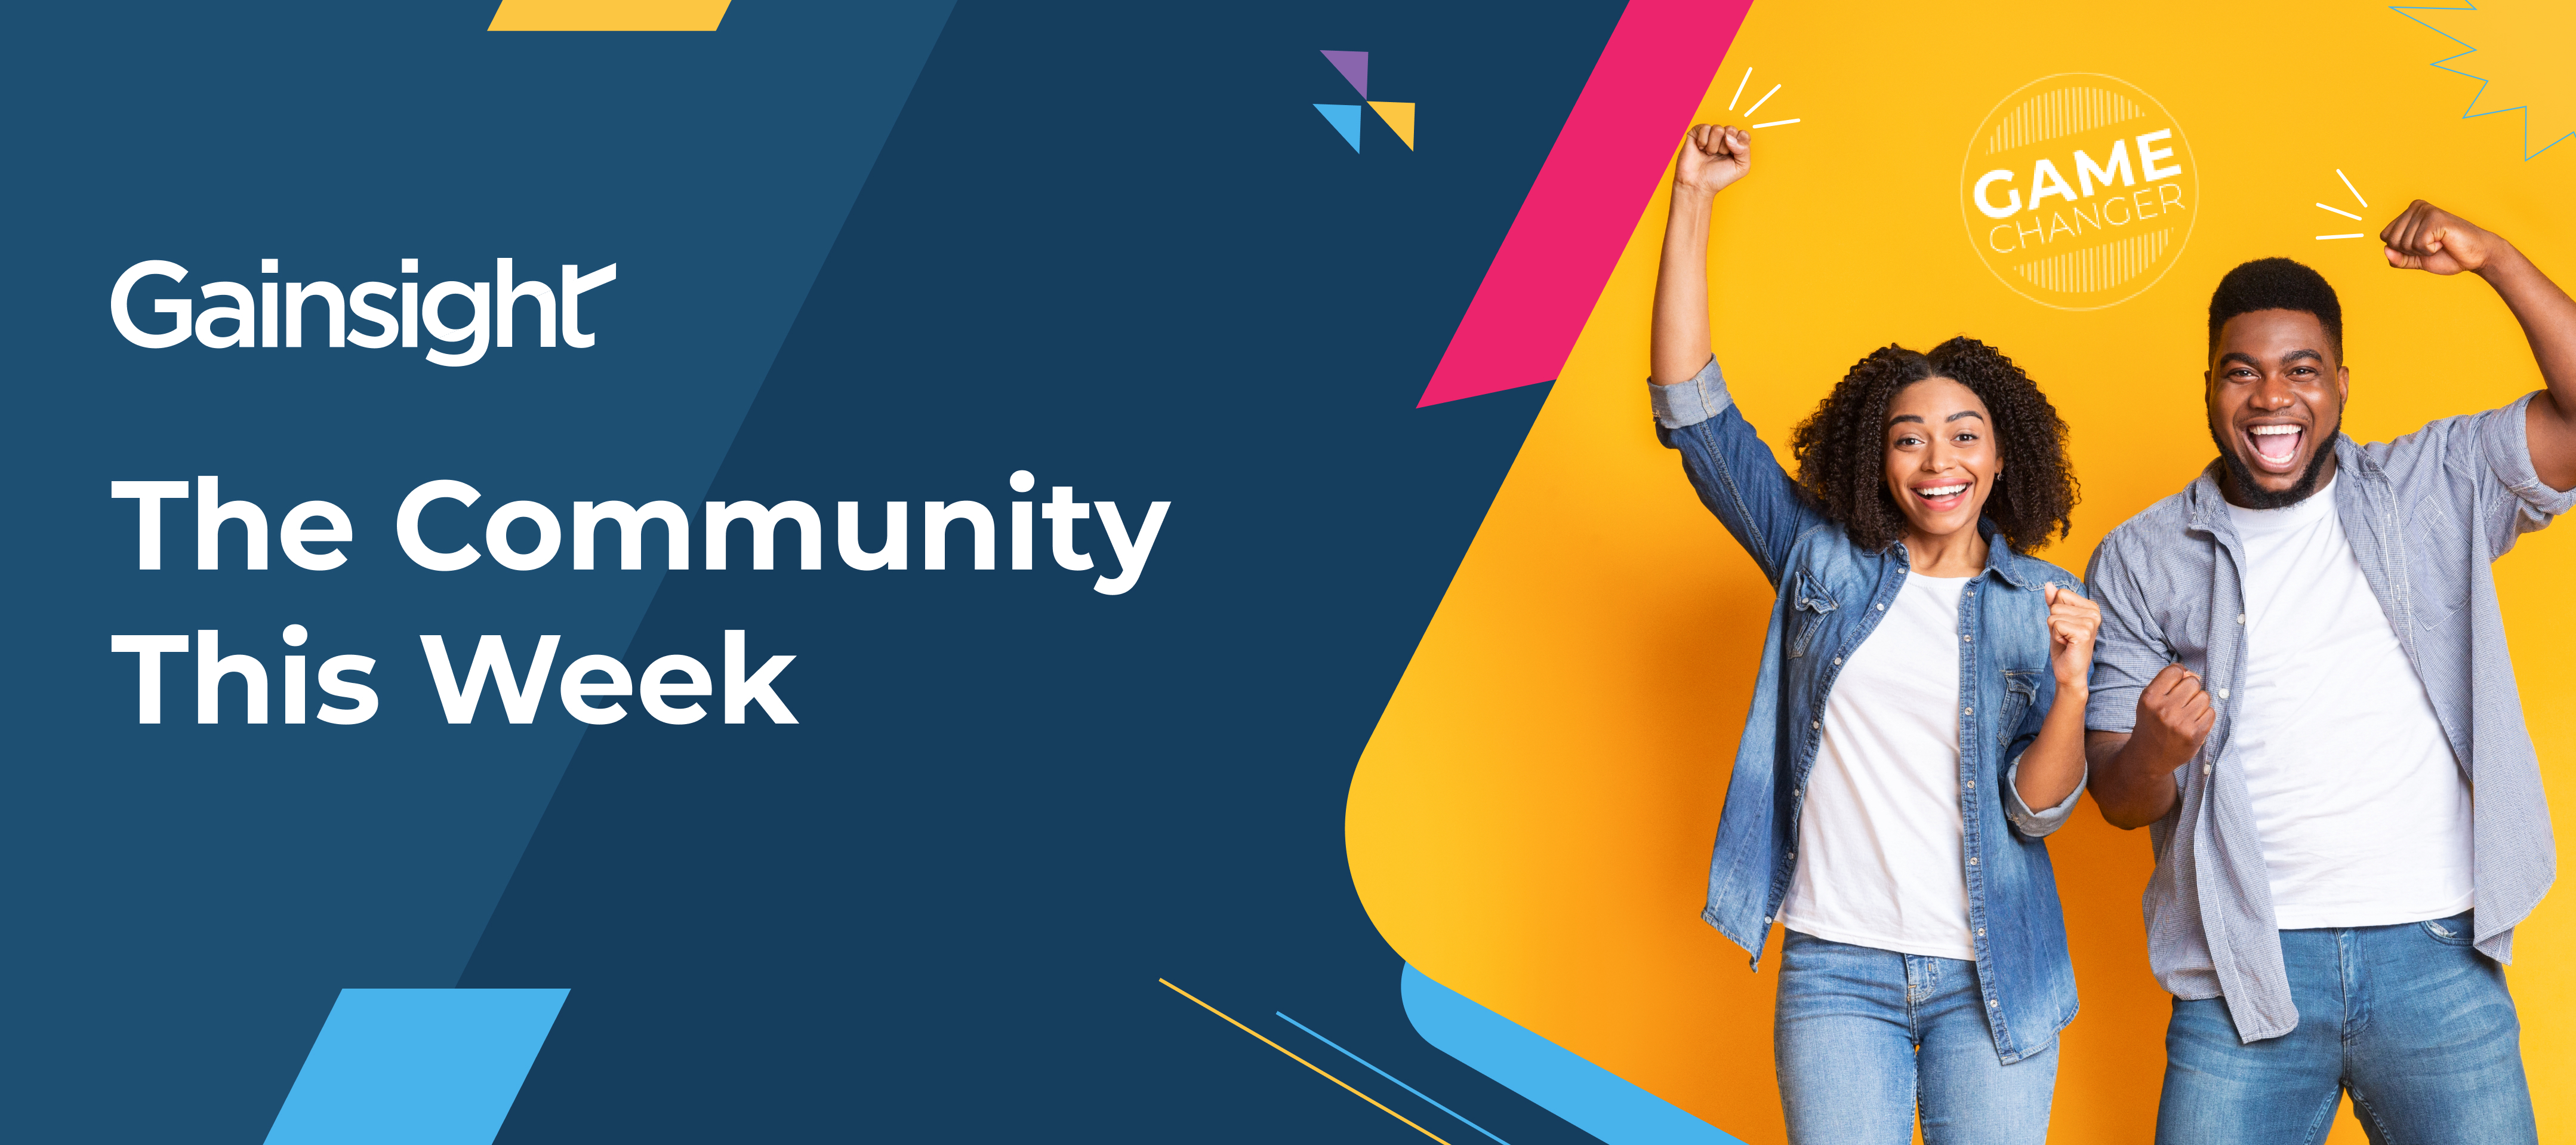 The Community This Week: Welcome Gainsight Education (Northpass) to the Community